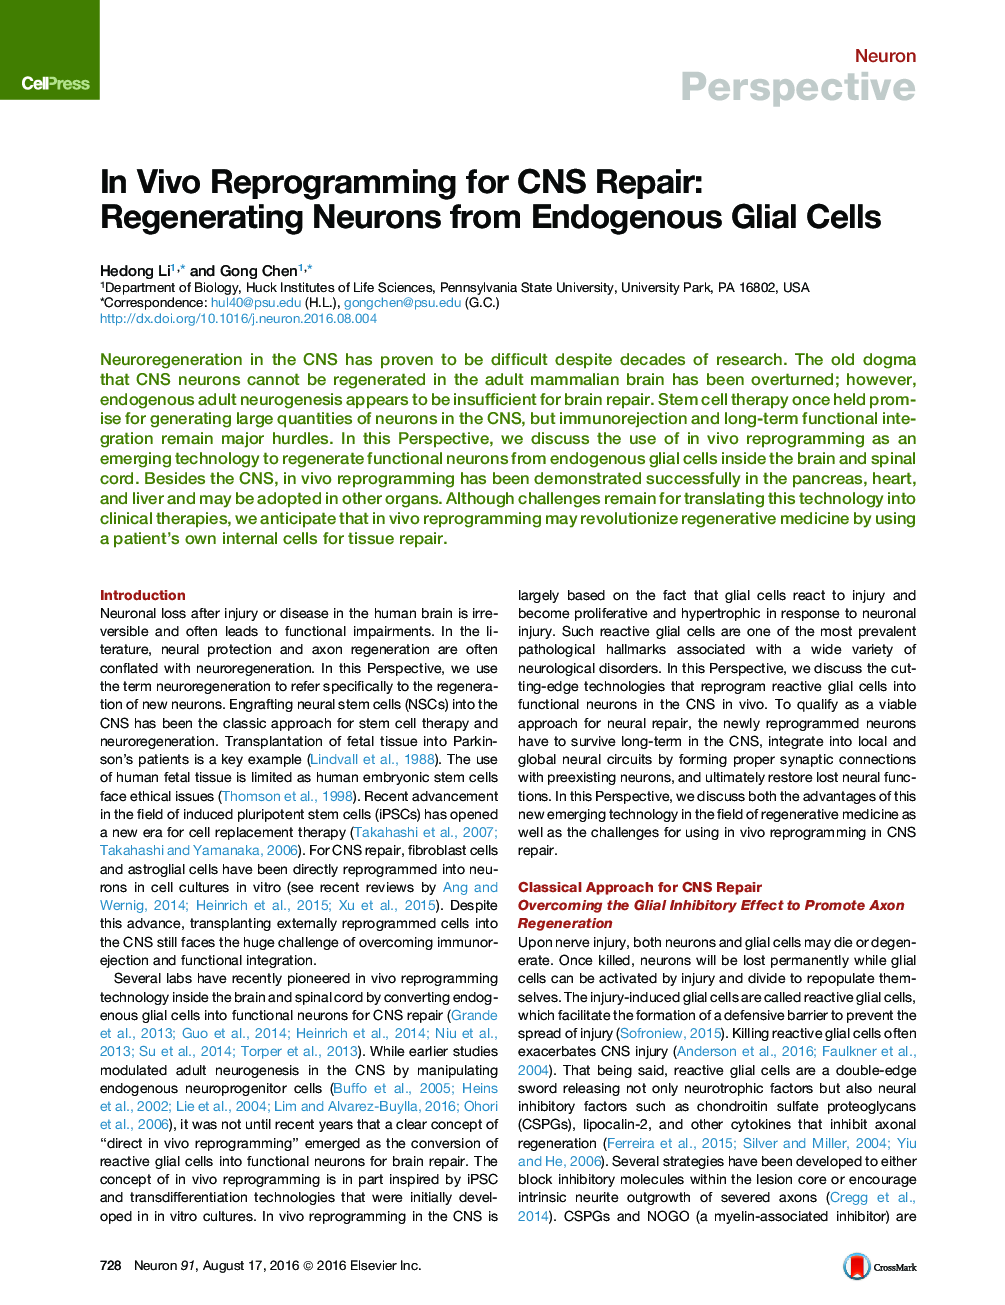 In Vivo Reprogramming for CNS Repair: Regenerating Neurons from Endogenous Glial Cells